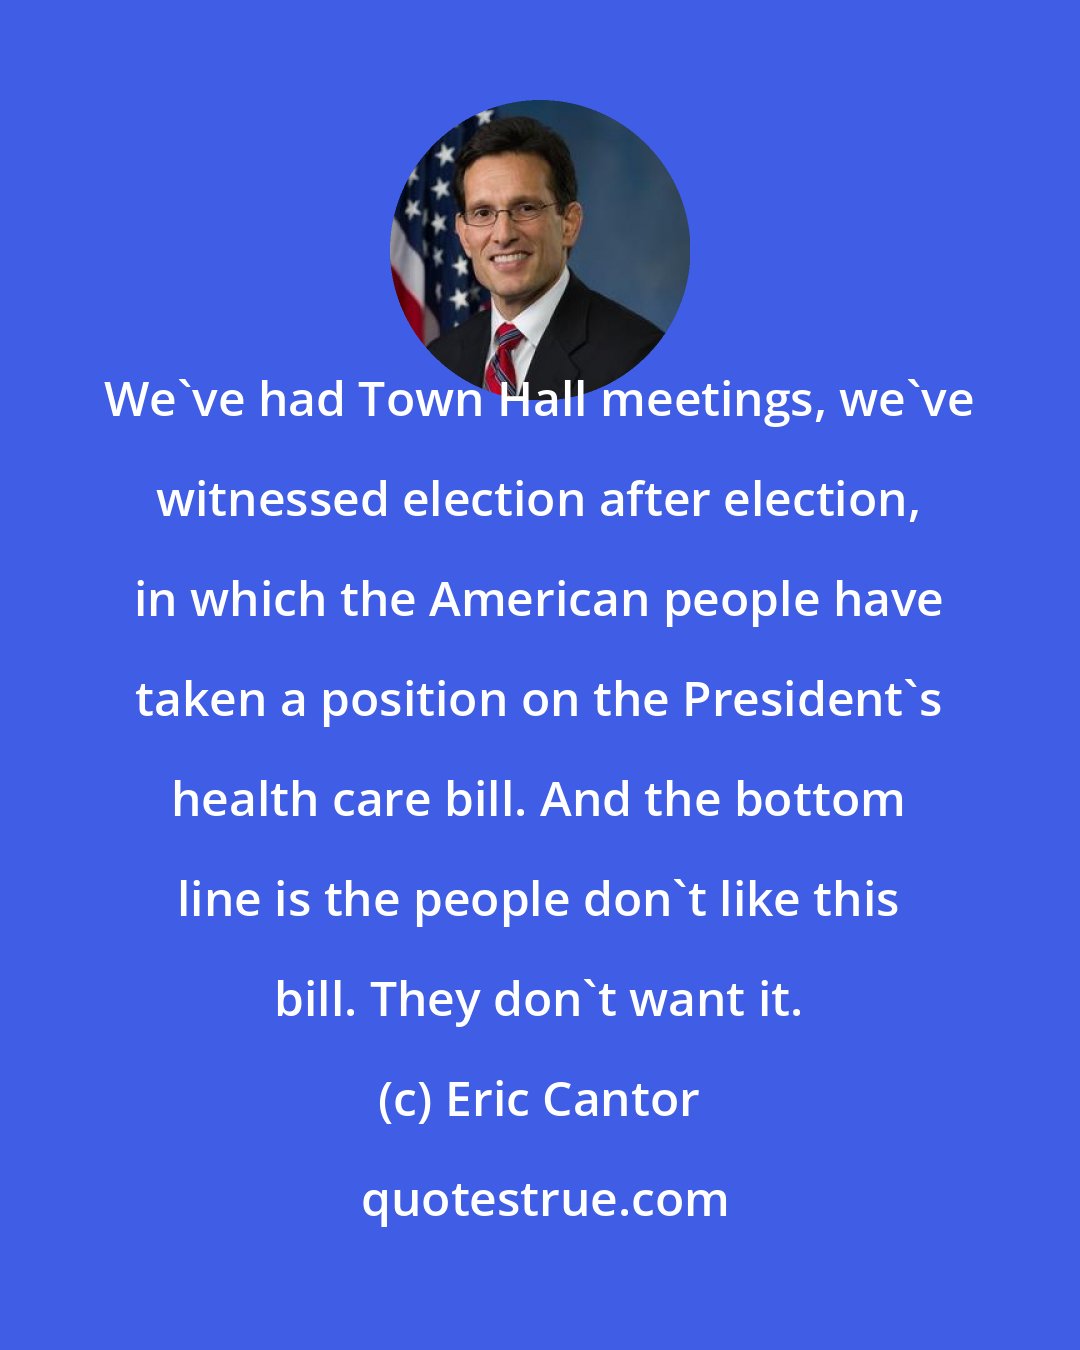 Eric Cantor: We've had Town Hall meetings, we've witnessed election after election, in which the American people have taken a position on the President's health care bill. And the bottom line is the people don't like this bill. They don't want it.